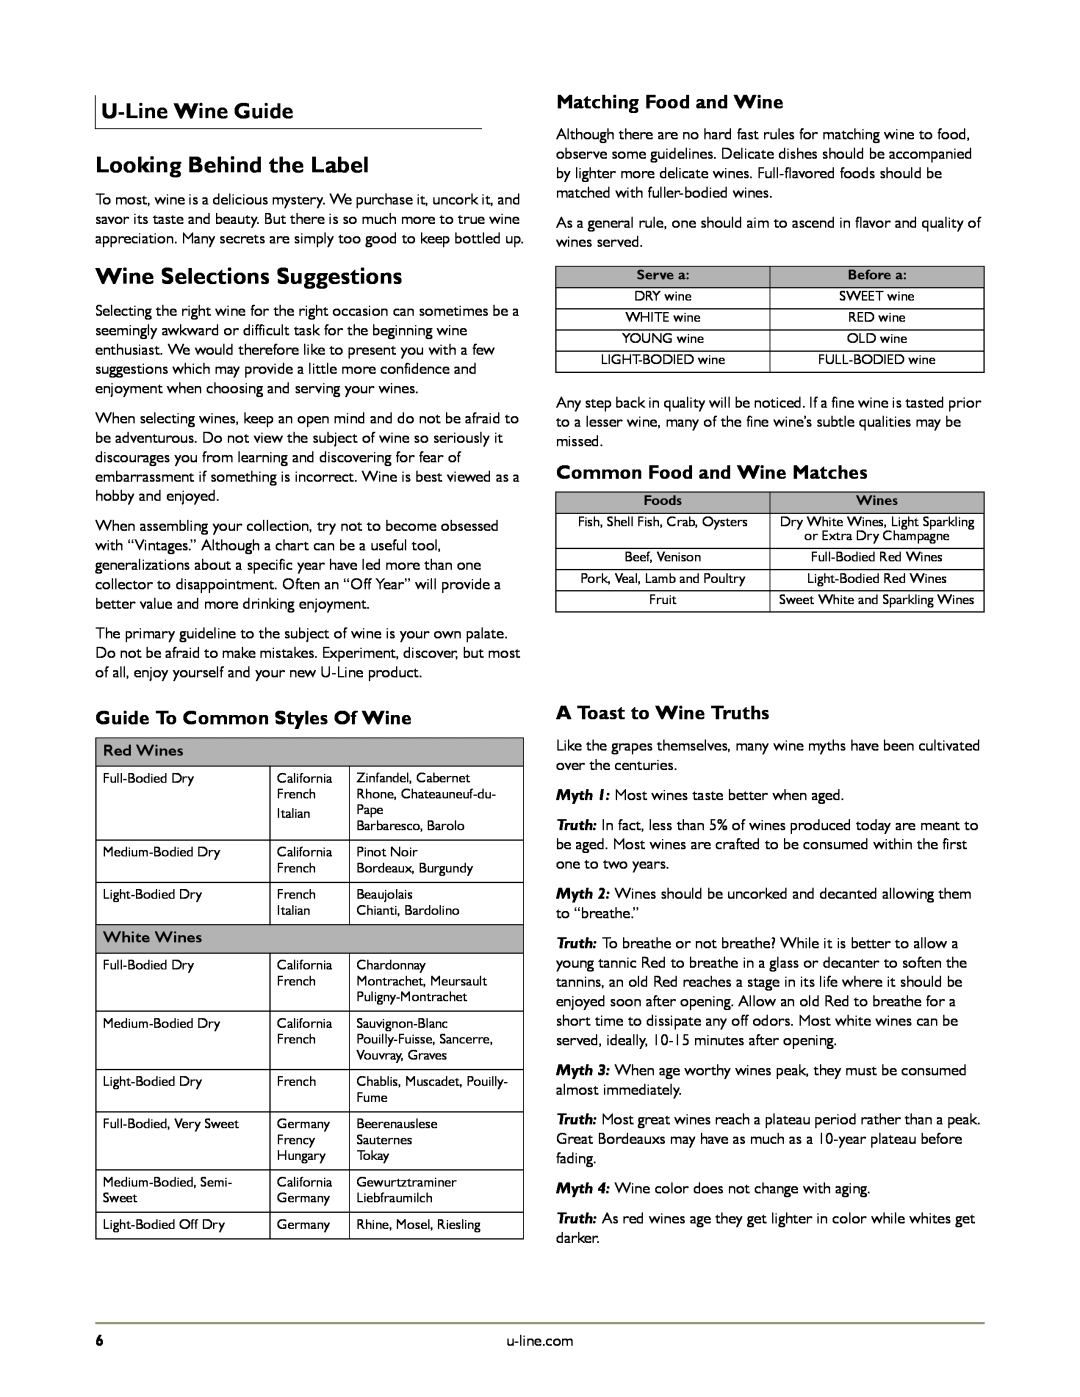 U-Line U-2275ZWCS-01 manual Looking Behind the Label, Wine Selections Suggestions, U-LineWine Guide, Matching Food and Wine 